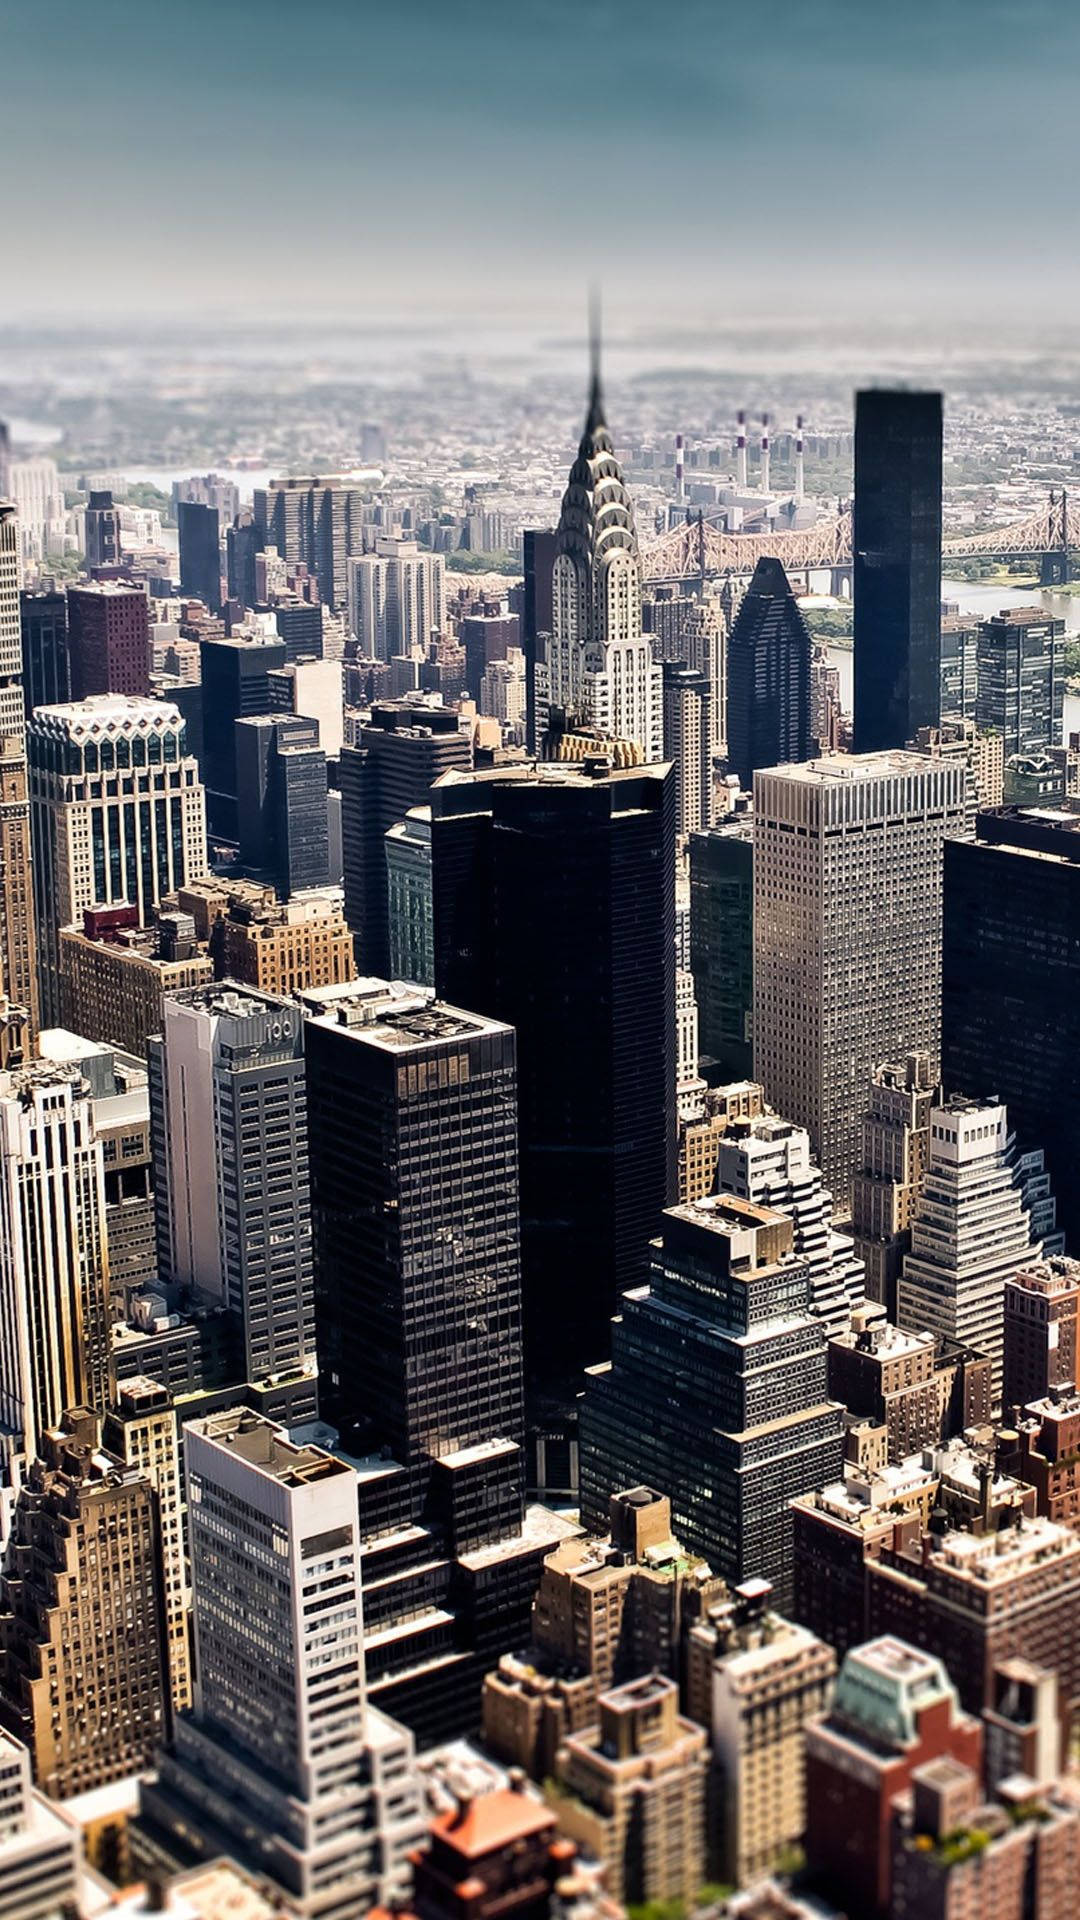 Top 999+ New York Skyline Iphone Wallpaper Full HD, 4K✅Free to Use